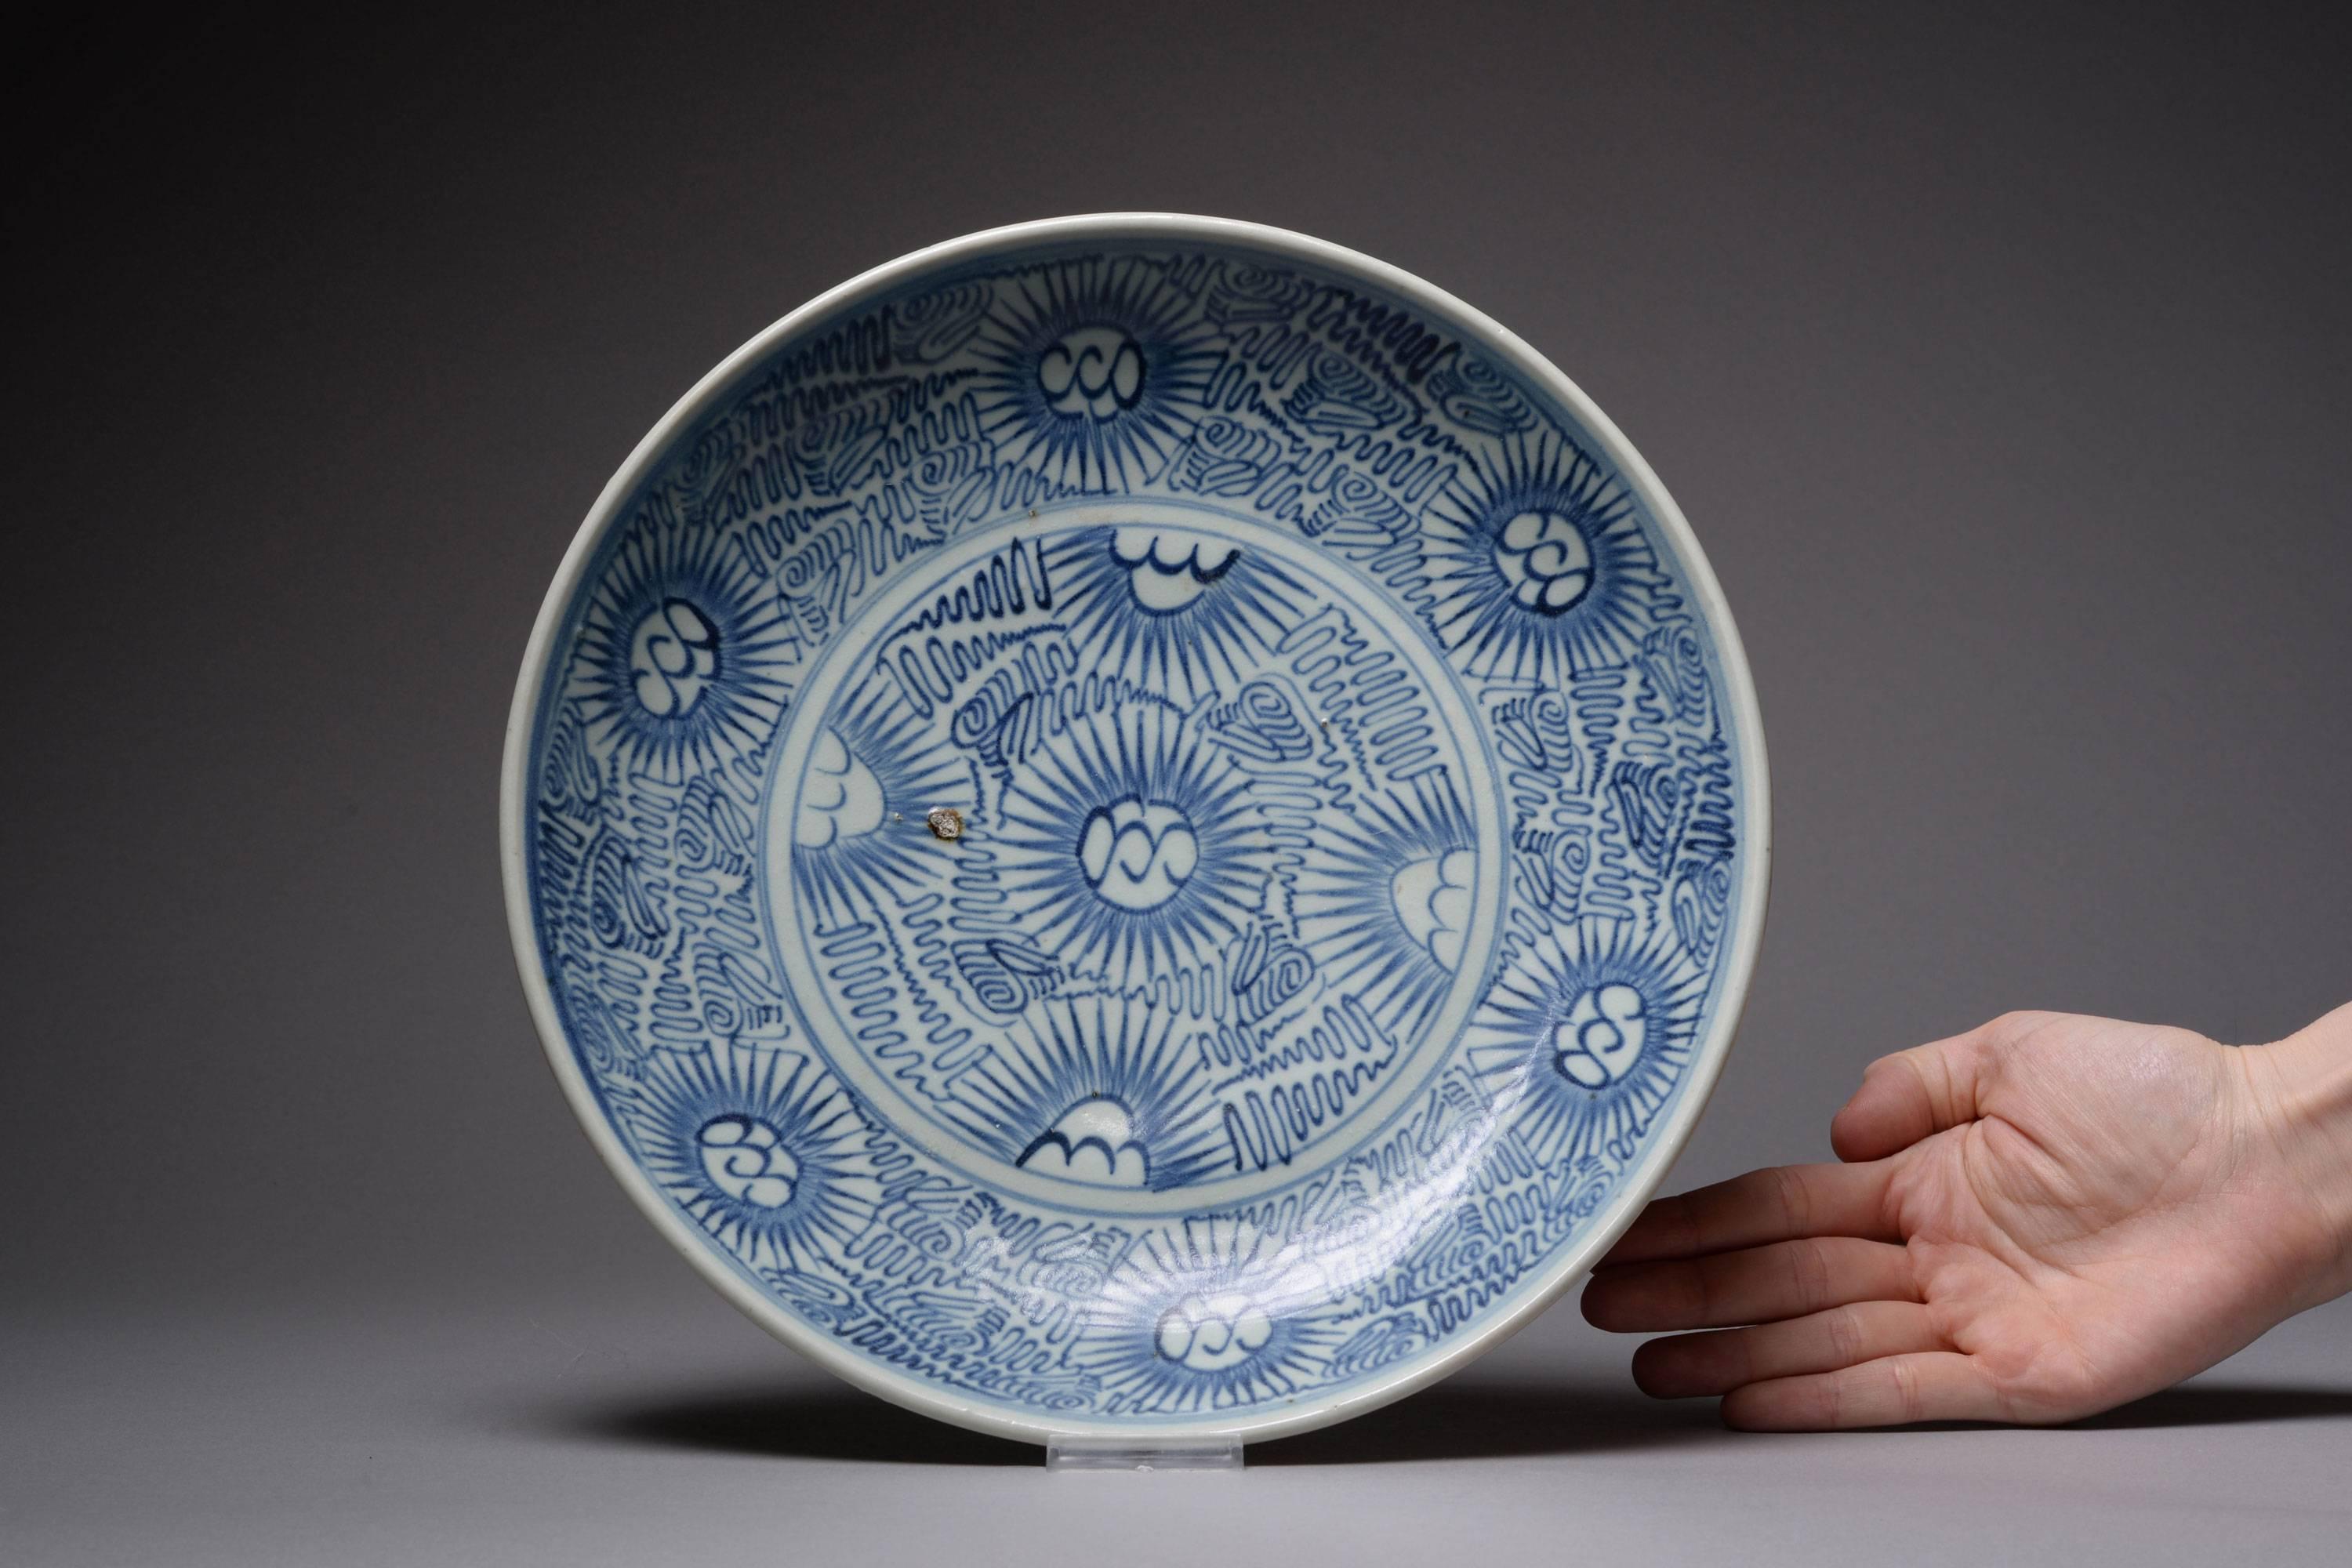 A superb, large and extremely decorative antique Chinese blue and white porcelain charger or presentation dish. Salvaged from the Diana cargo shipwreck and dating to 1817. Sold at Christie's, March 1995.

Profusely decorated in vibrant blue on a